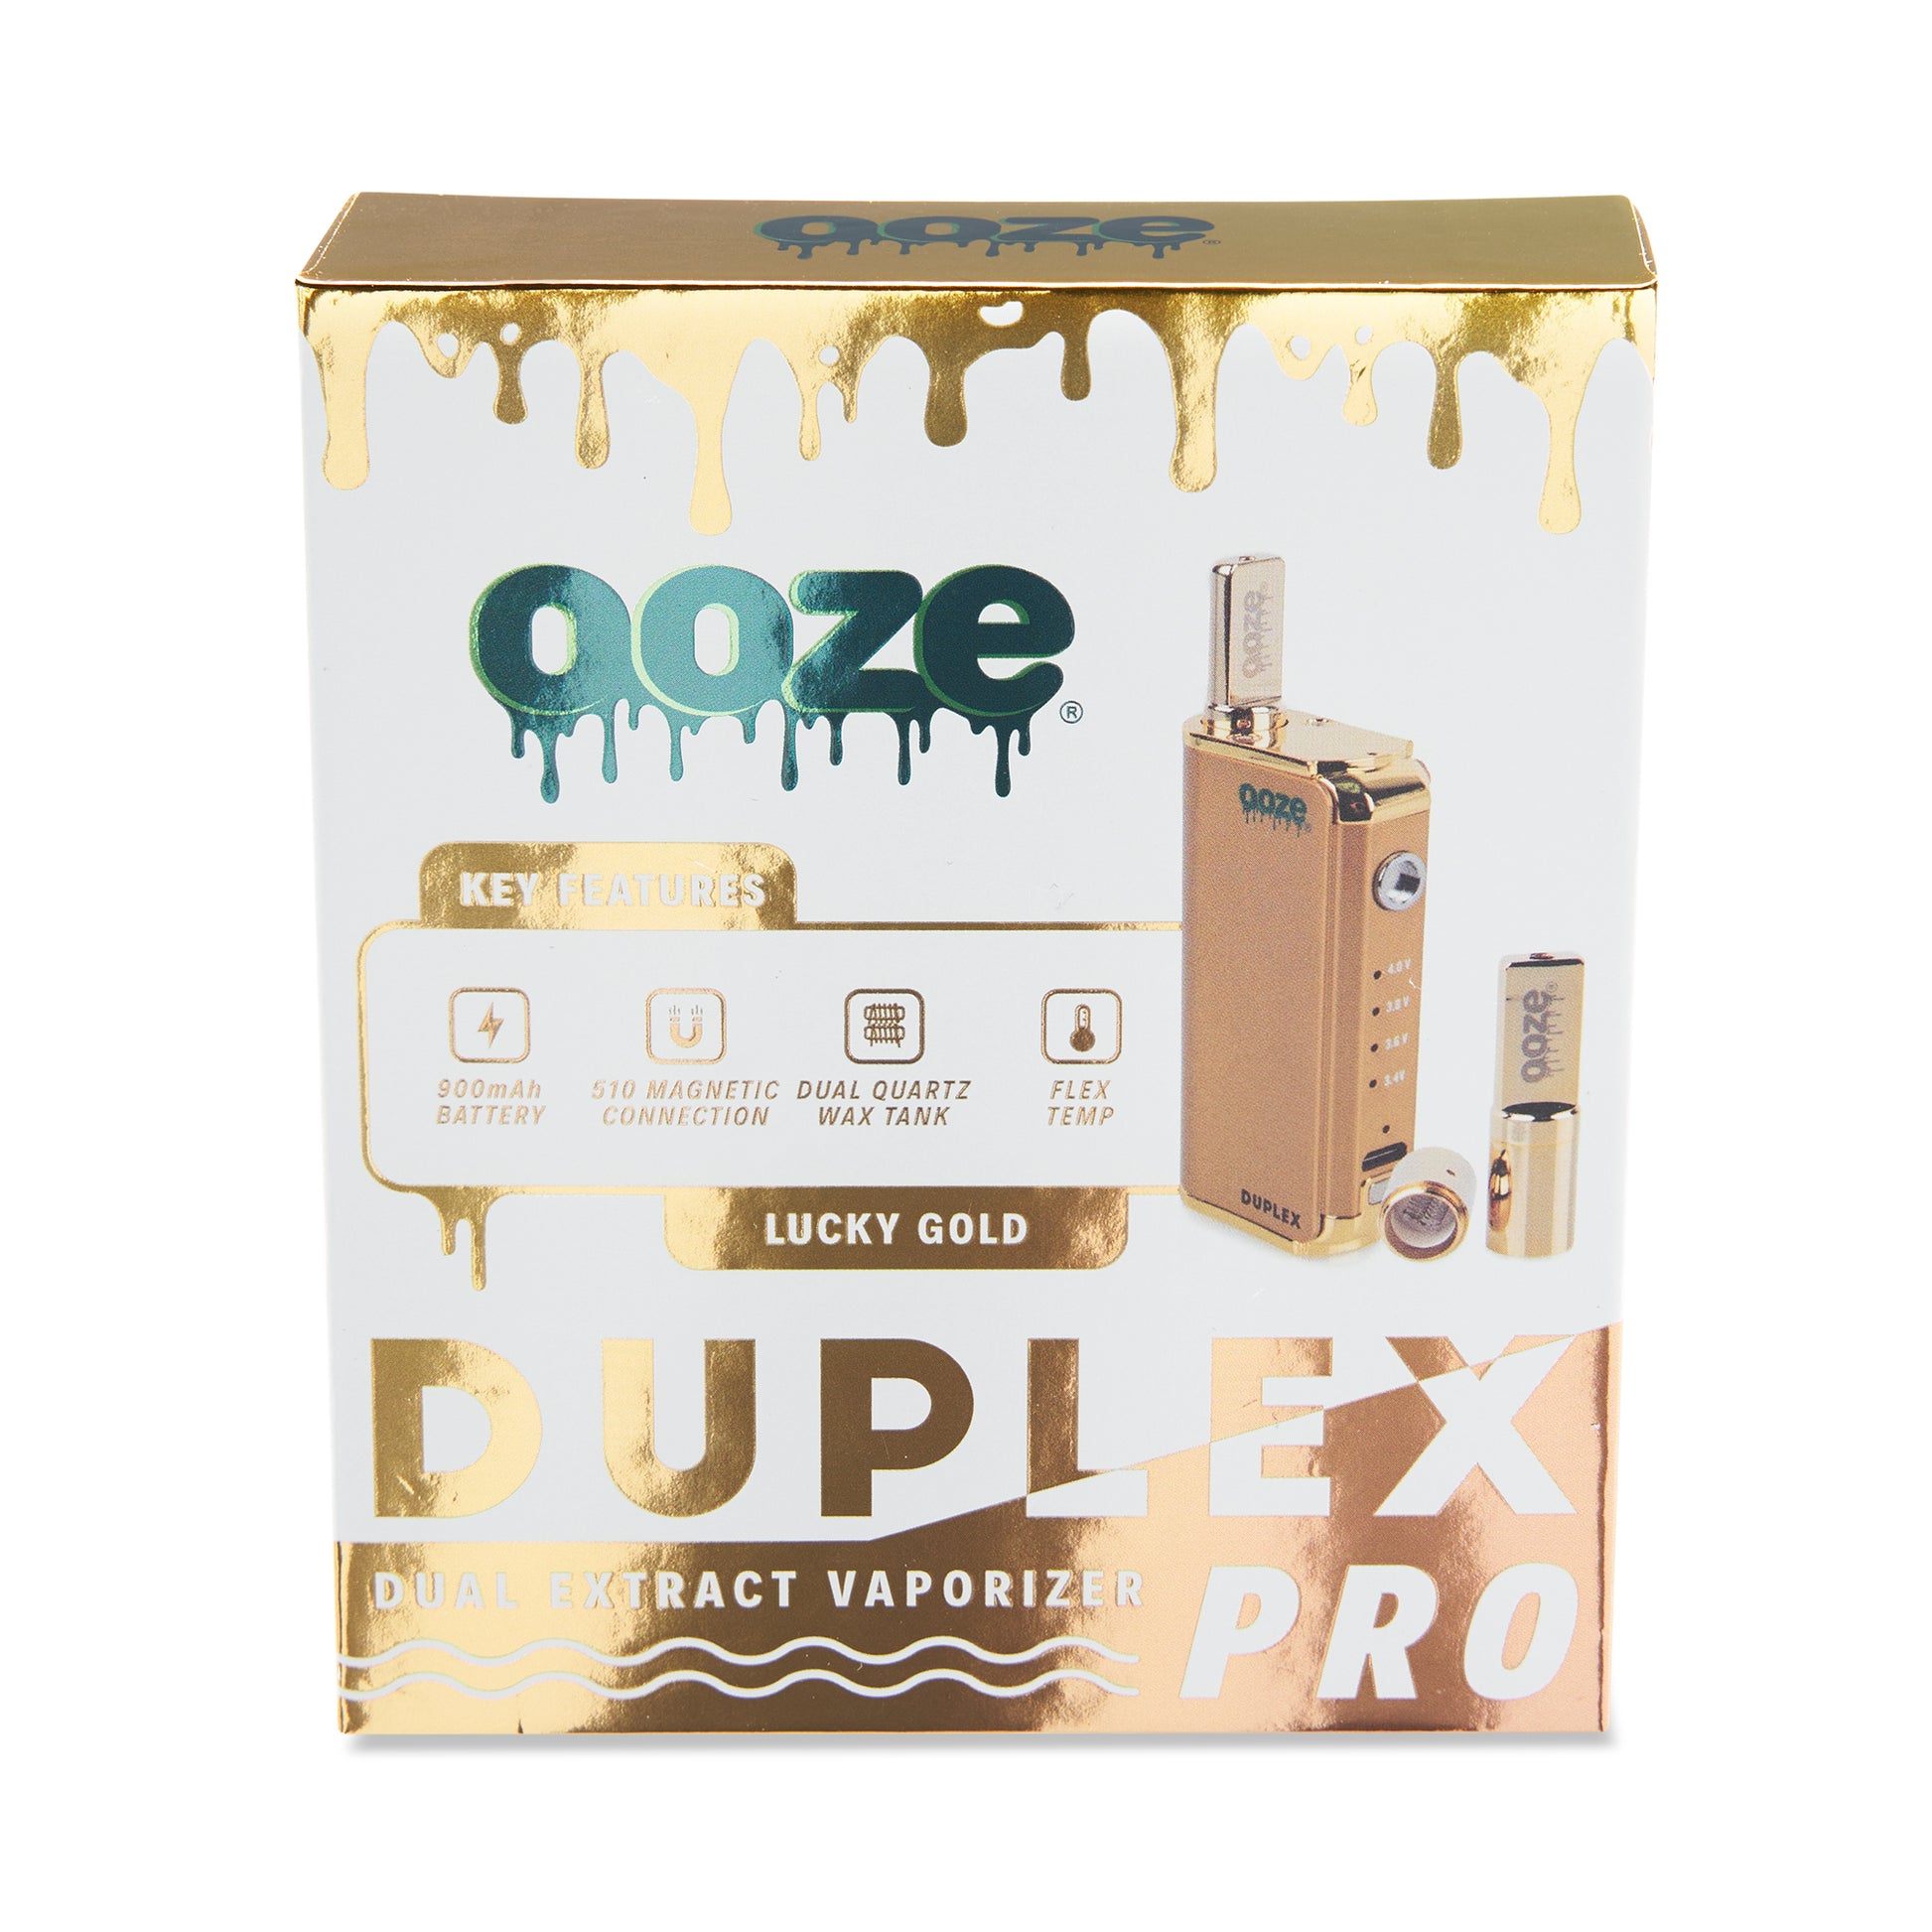 The front of the packaging for The Lucky Gold Ooze Duplex Pro Vaporizer.